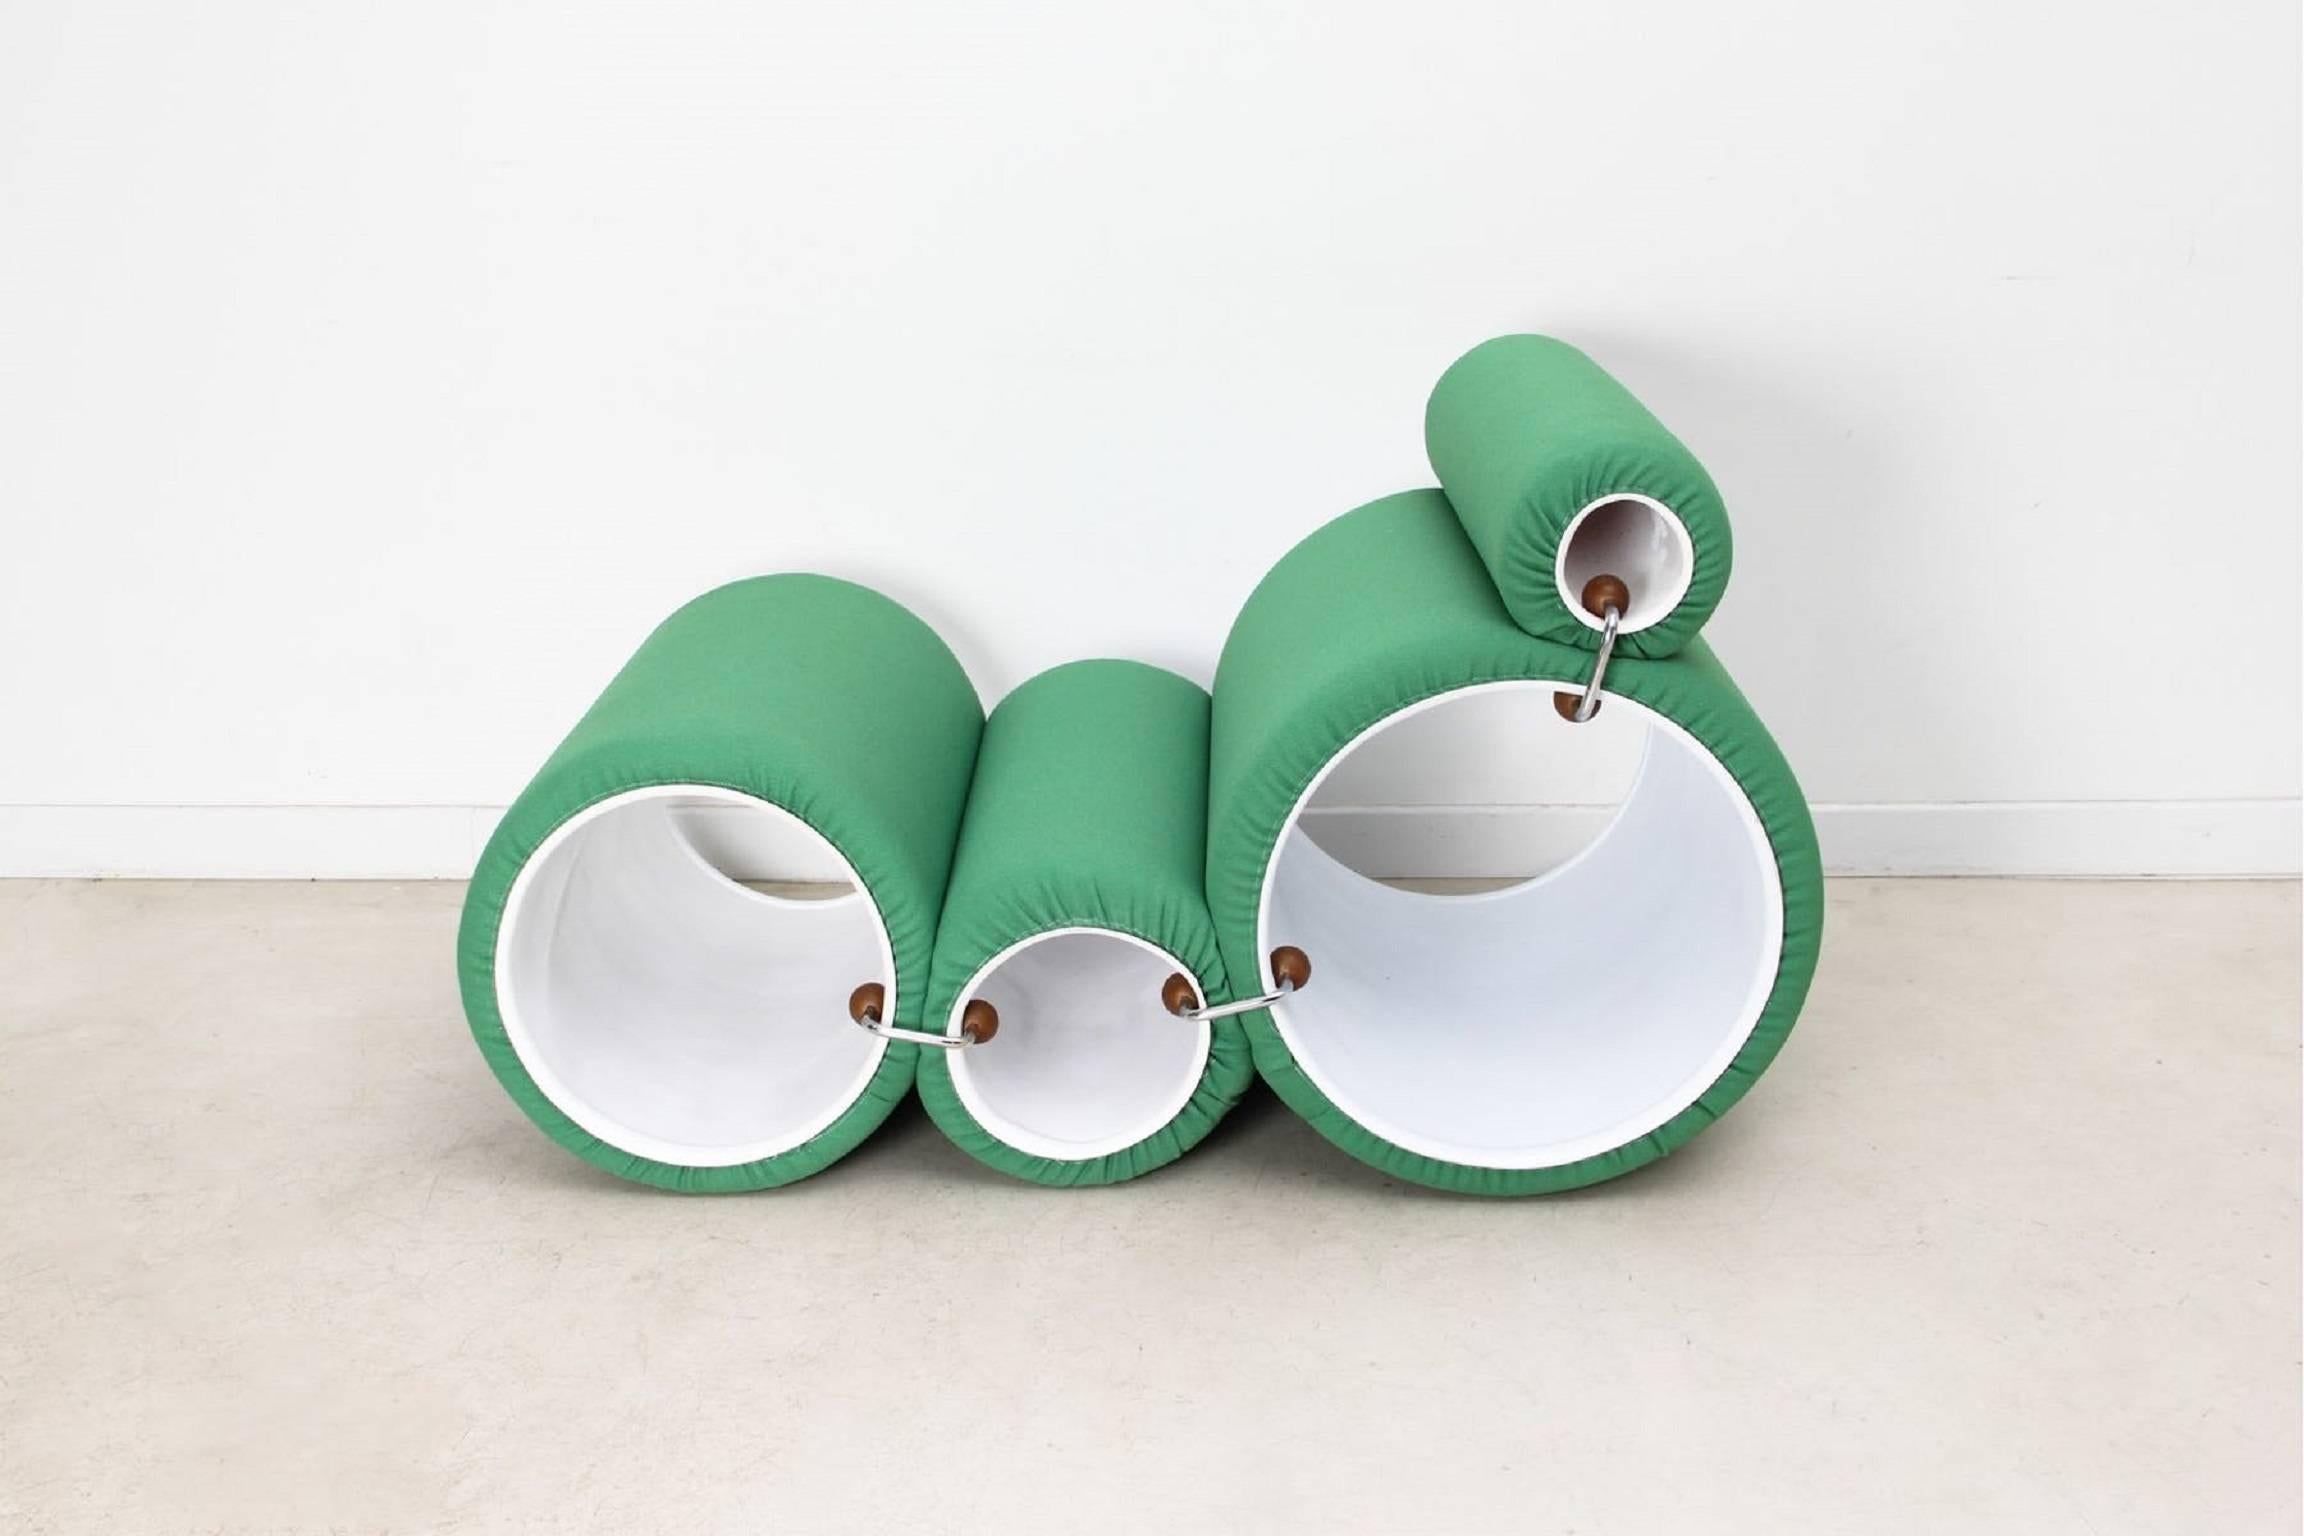 Joe Colombo
Tube chair
Green jersey
circa 1969
Original Flexform edition with its original bag 
Perfect condition
Measures: 60 x 60 x 50 cms (depending on configuration)
This incredible chair is composed of four cylinders of different diameters that